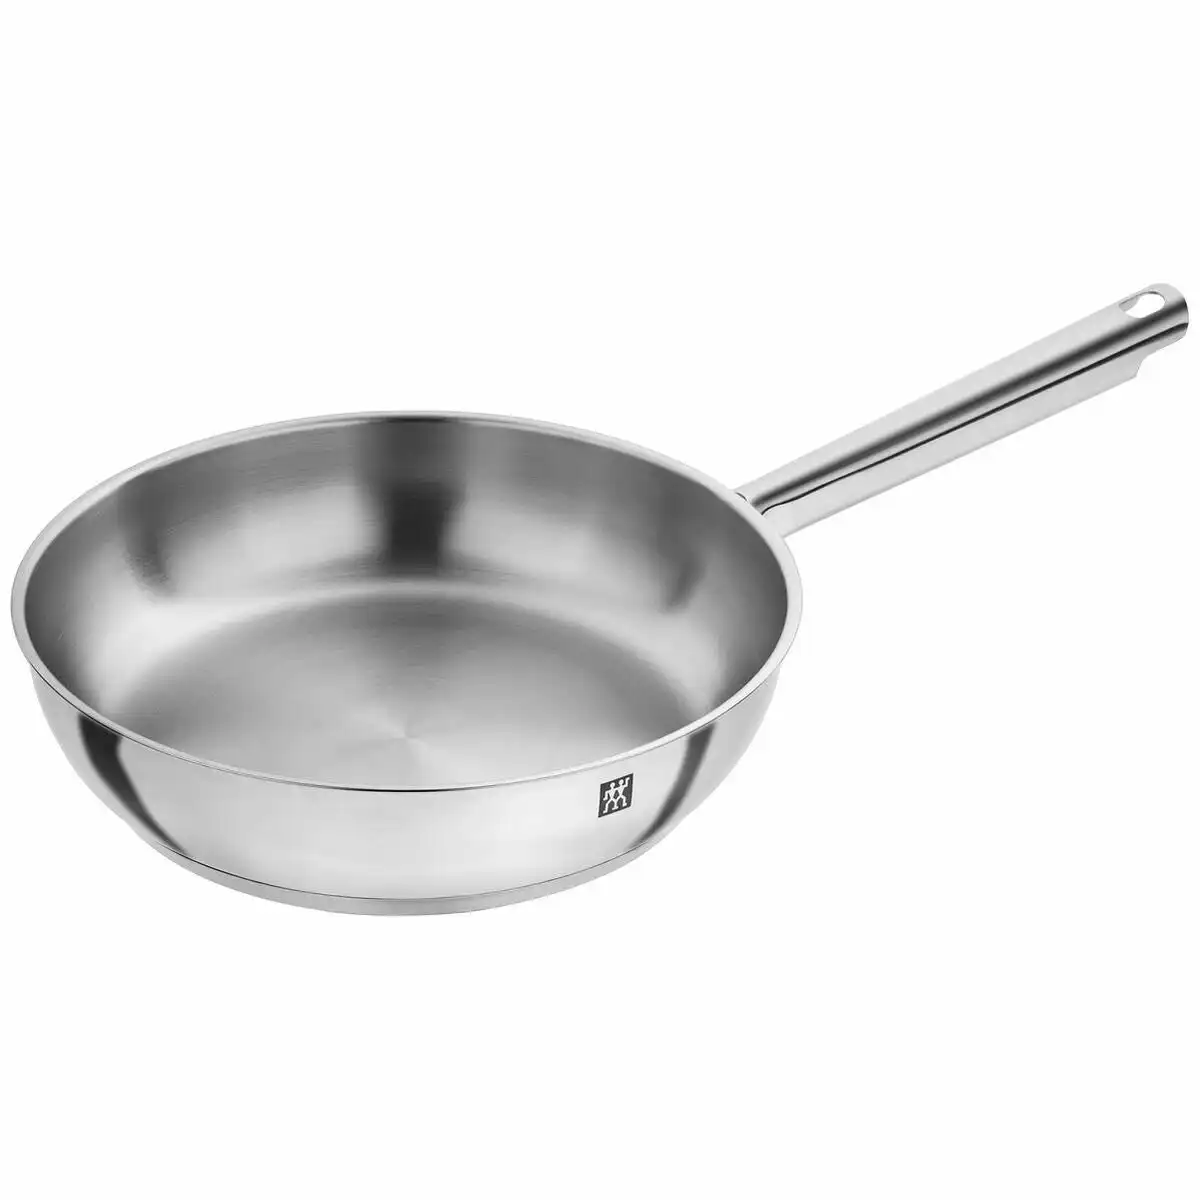 Zwilling 24cm Base Frypan - Uncoated